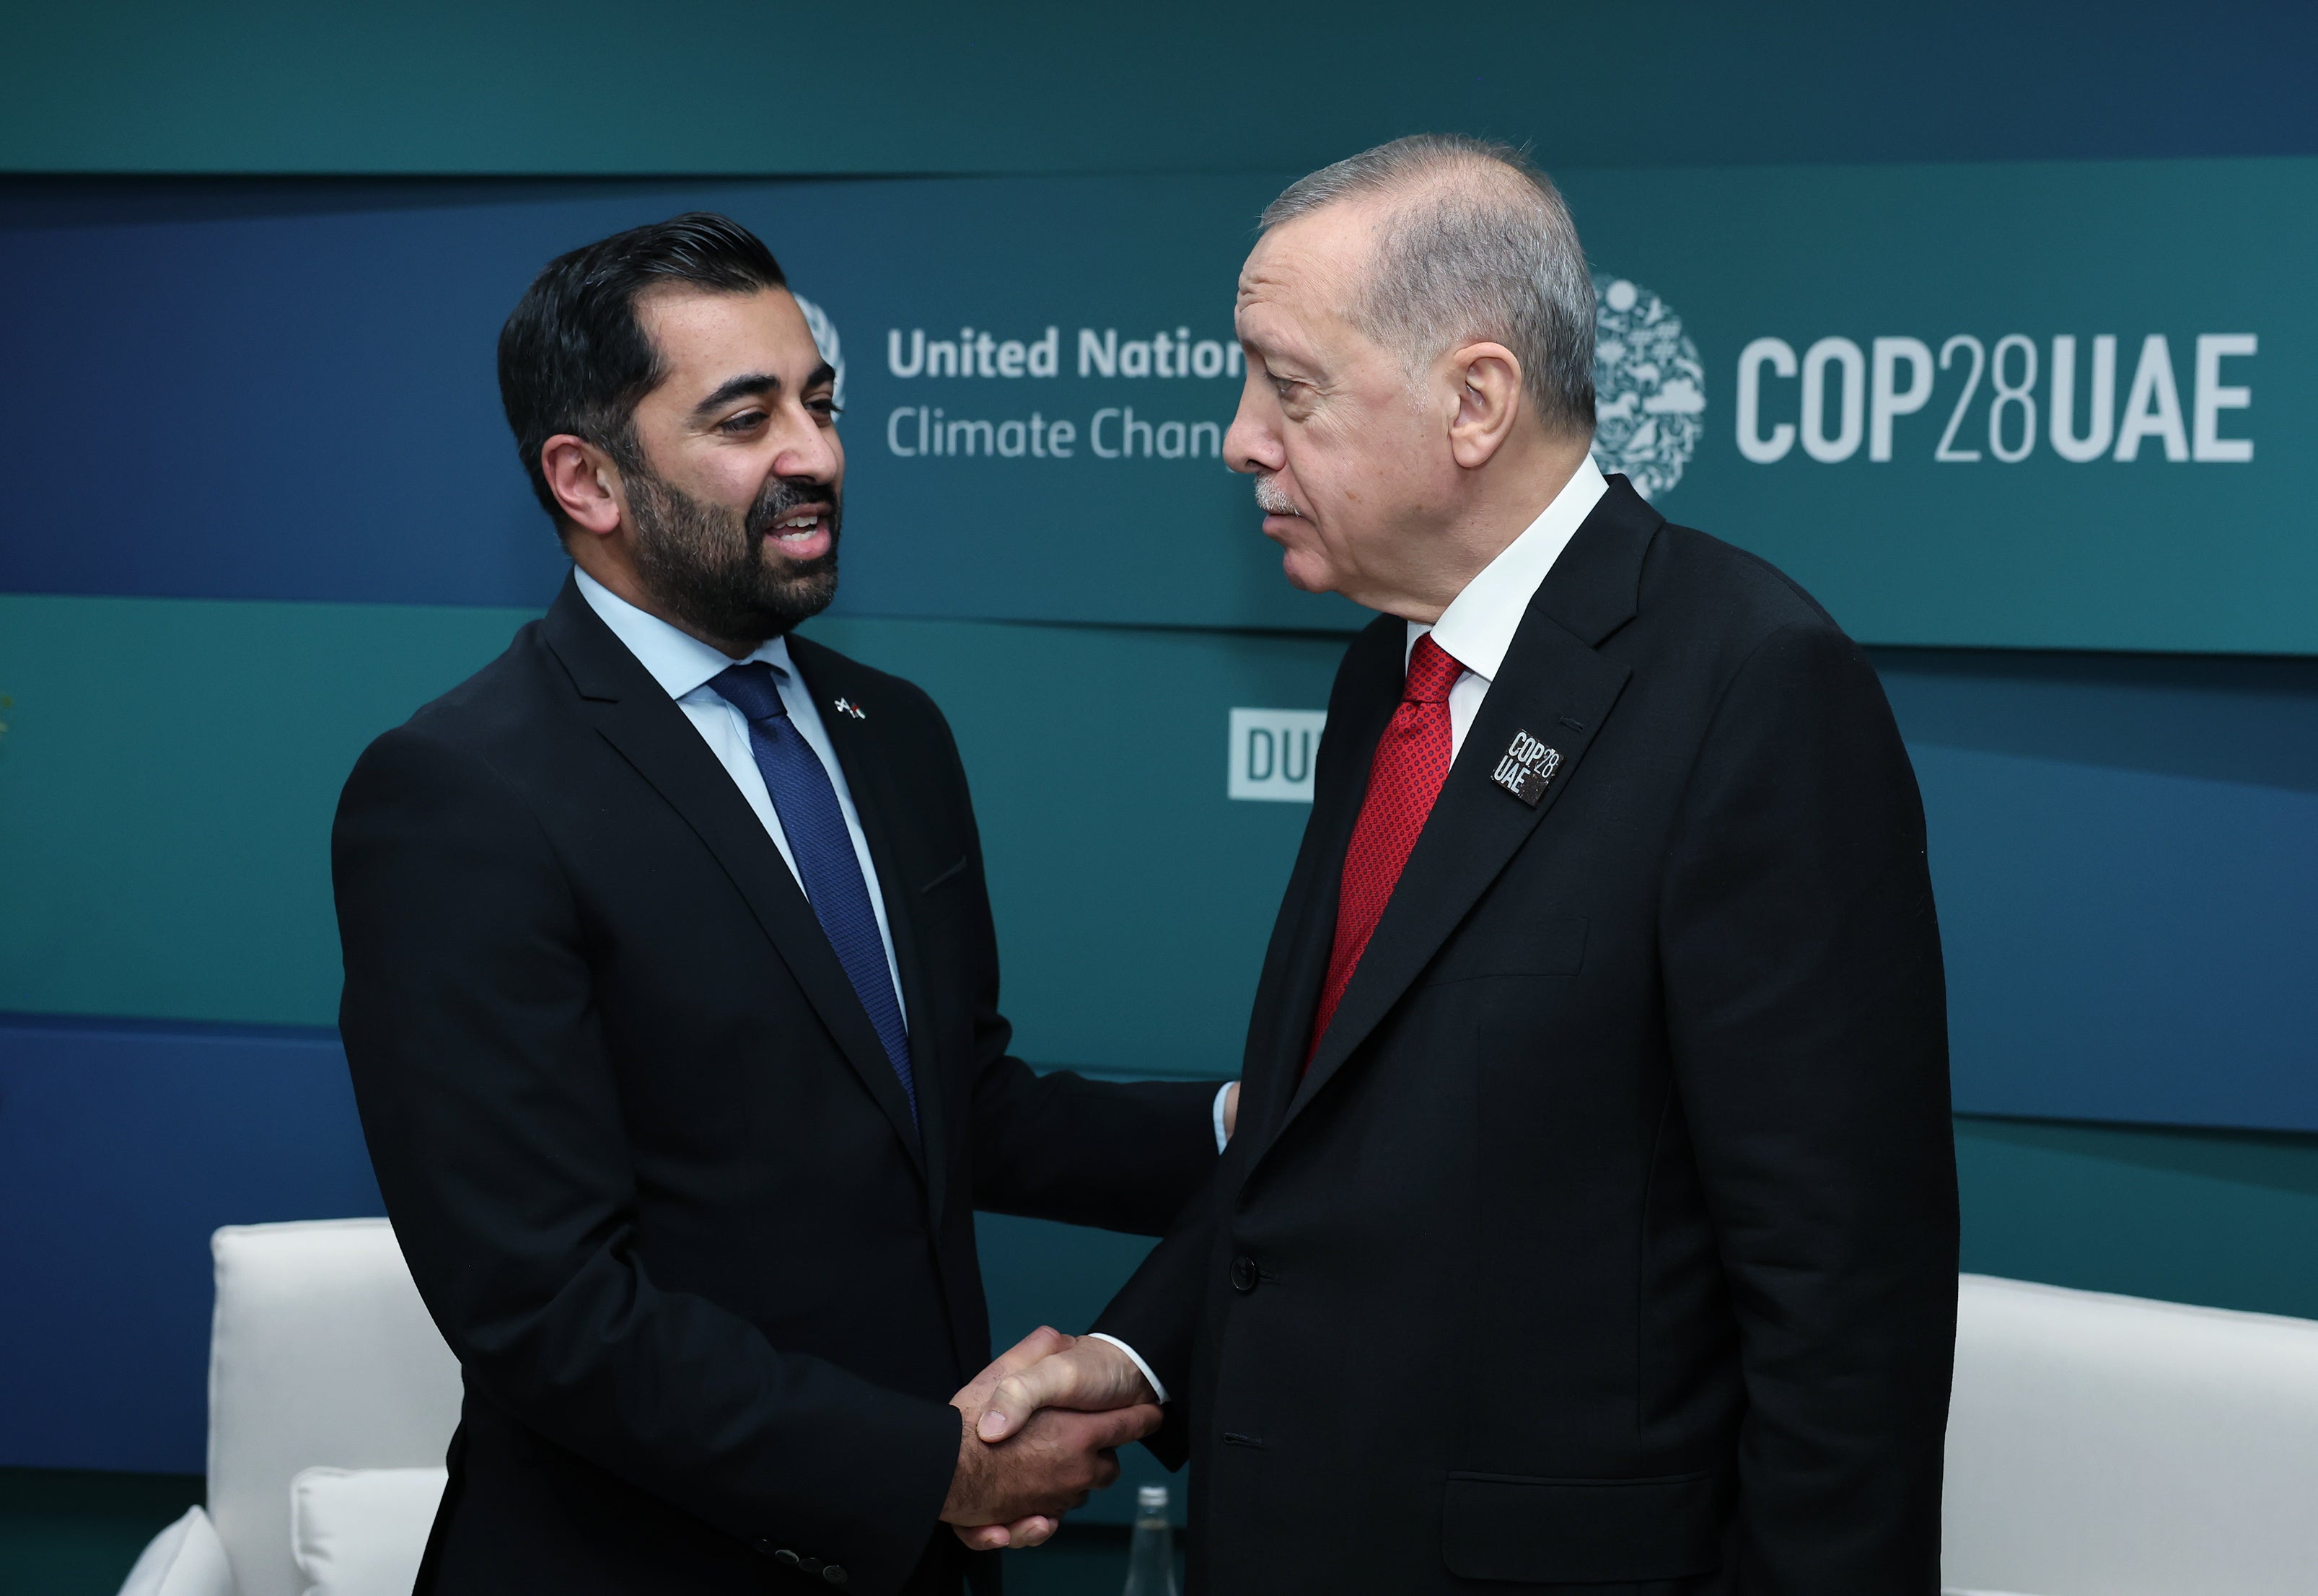 Scotland first minister Humza Yousaf meets President Erdogan of Turkey at Cop28 in Dubai